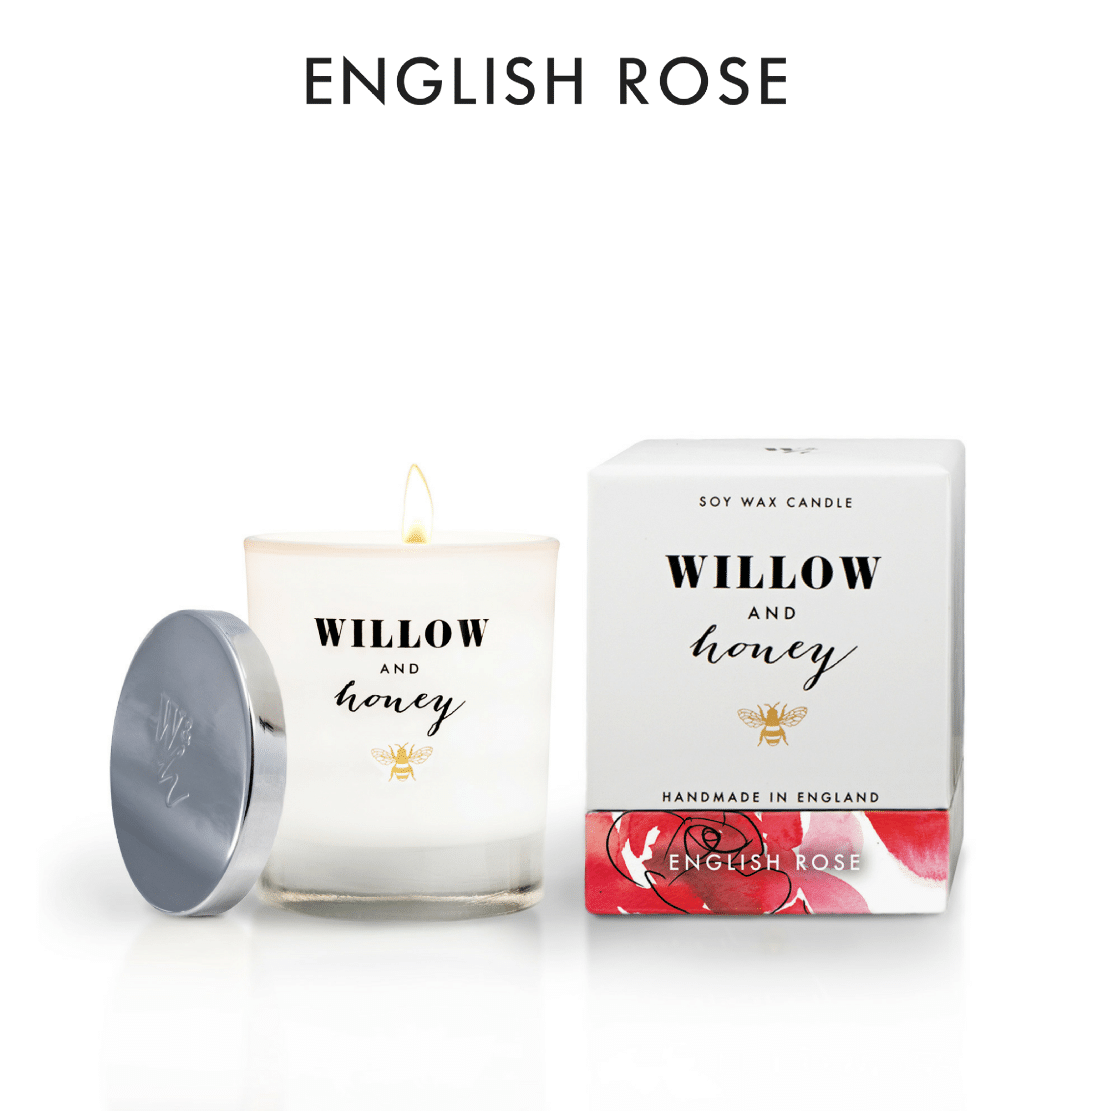 Willow and Honey English Rose Candle 220g